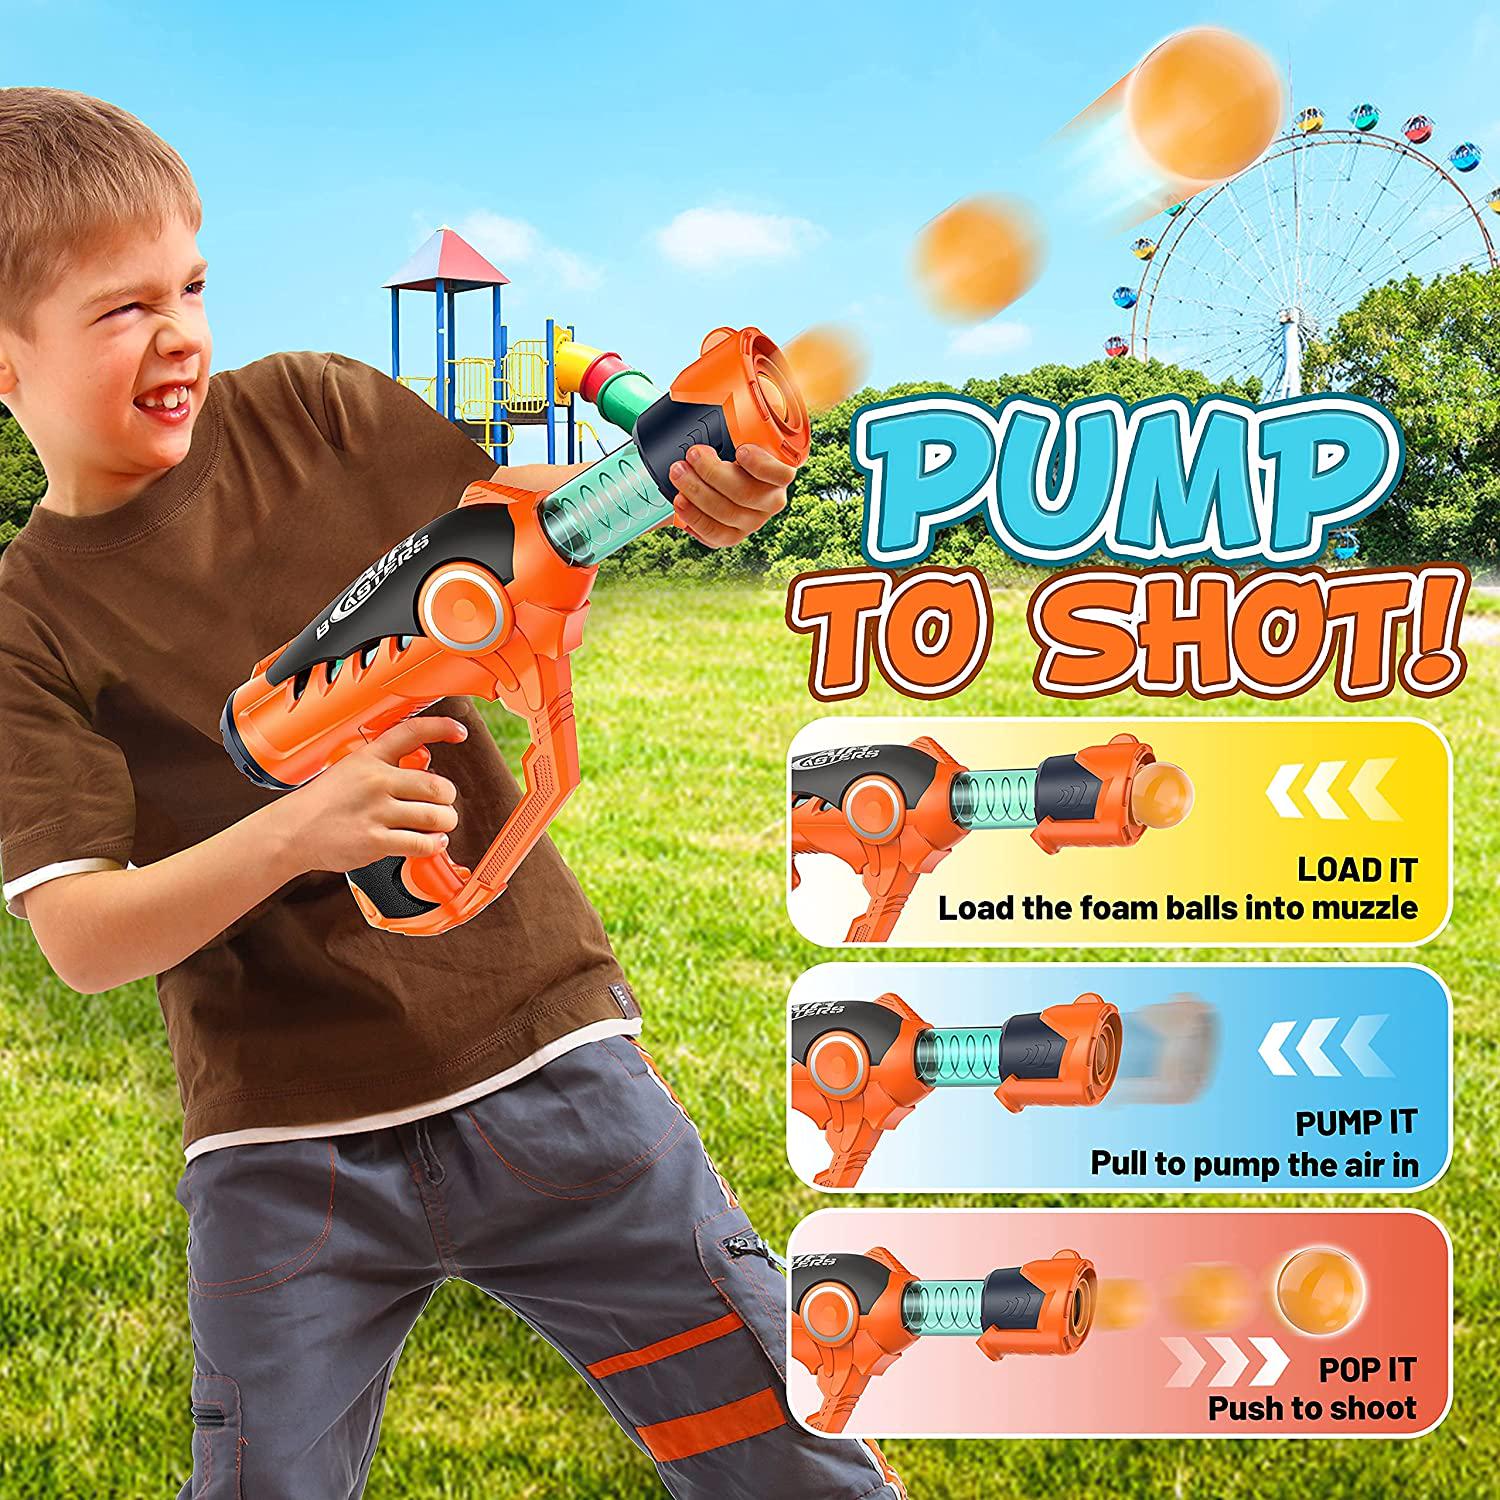 LUKAT, LUKAT Shooting Game Toy for Age 6, 7, 8, 9, 10+ Years Old Kids, Girls, Boys - Foam Ball Popper Air Guns Toy and 36 Foam Bullet Balls, Sniper Kids Gun Toy Indoor Outdoor Games, Gift Idea for Age 6-12+